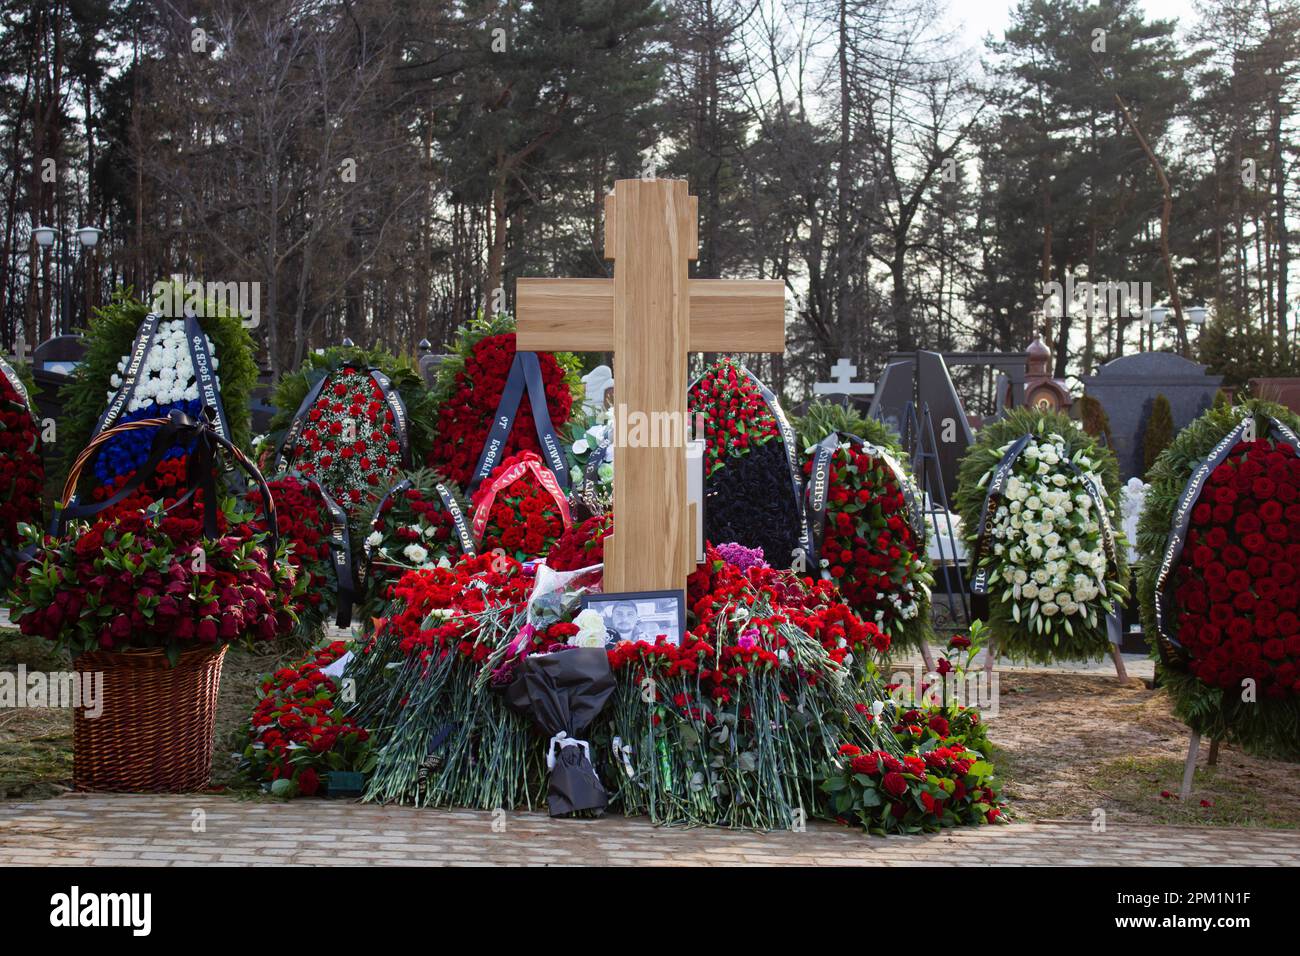 Vladlen Tatarsky's grave seen surrounded by flowers and wreaths at Troyekurovskoye cemetery in Moscow. Maxim Fomin better known by his pen-name Vladlen Tatarsky was a convicted criminal who escaped from prison and made a name for himself as a Ukrainian-born Russian military blogger and a participant in the war between Russian and Ukraine. He was active as a propagandist for the Russian side in the war until he was murdered in a terrorist act in St. Petersburg on April 2, 2023. 26-year-old woman named Darya Trepova was arrested for the bombing that had killed Tatarsky and injured dozens of othe Stock Photo